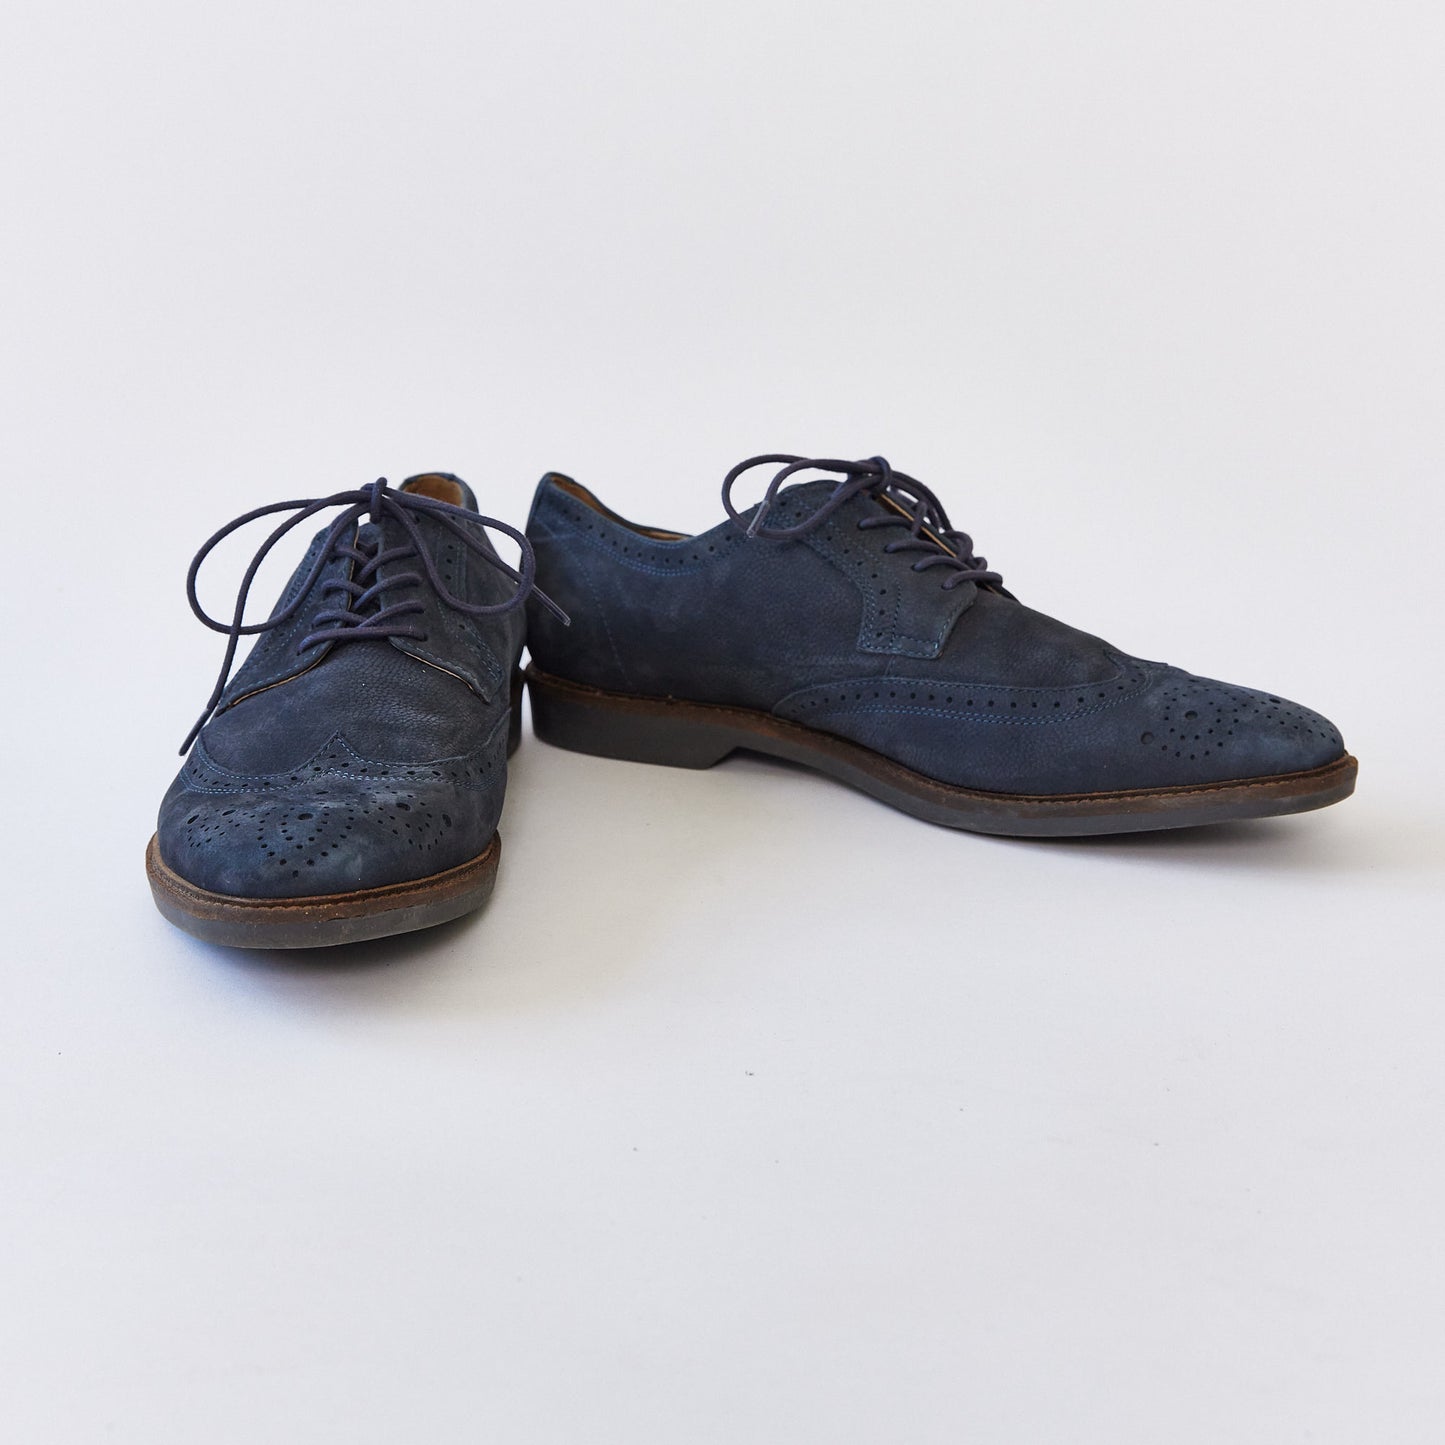 Navy suede lace up shoe size 9